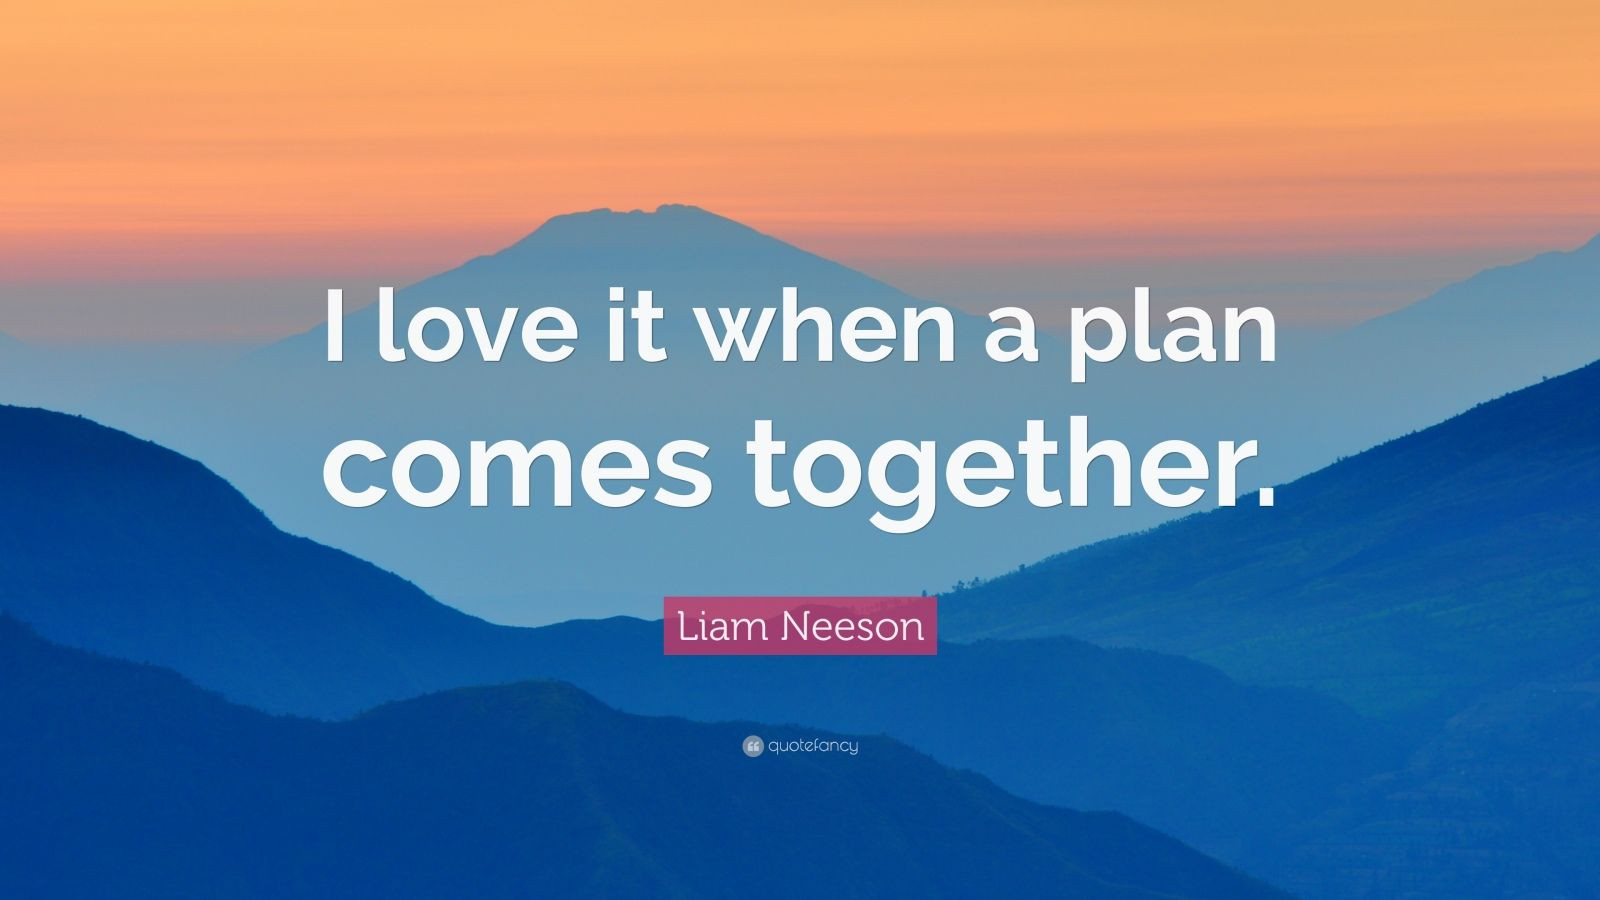 I Love It When A Plan Comes Together Quote
 Liam Neeson Quote “I love it when a plan es to her